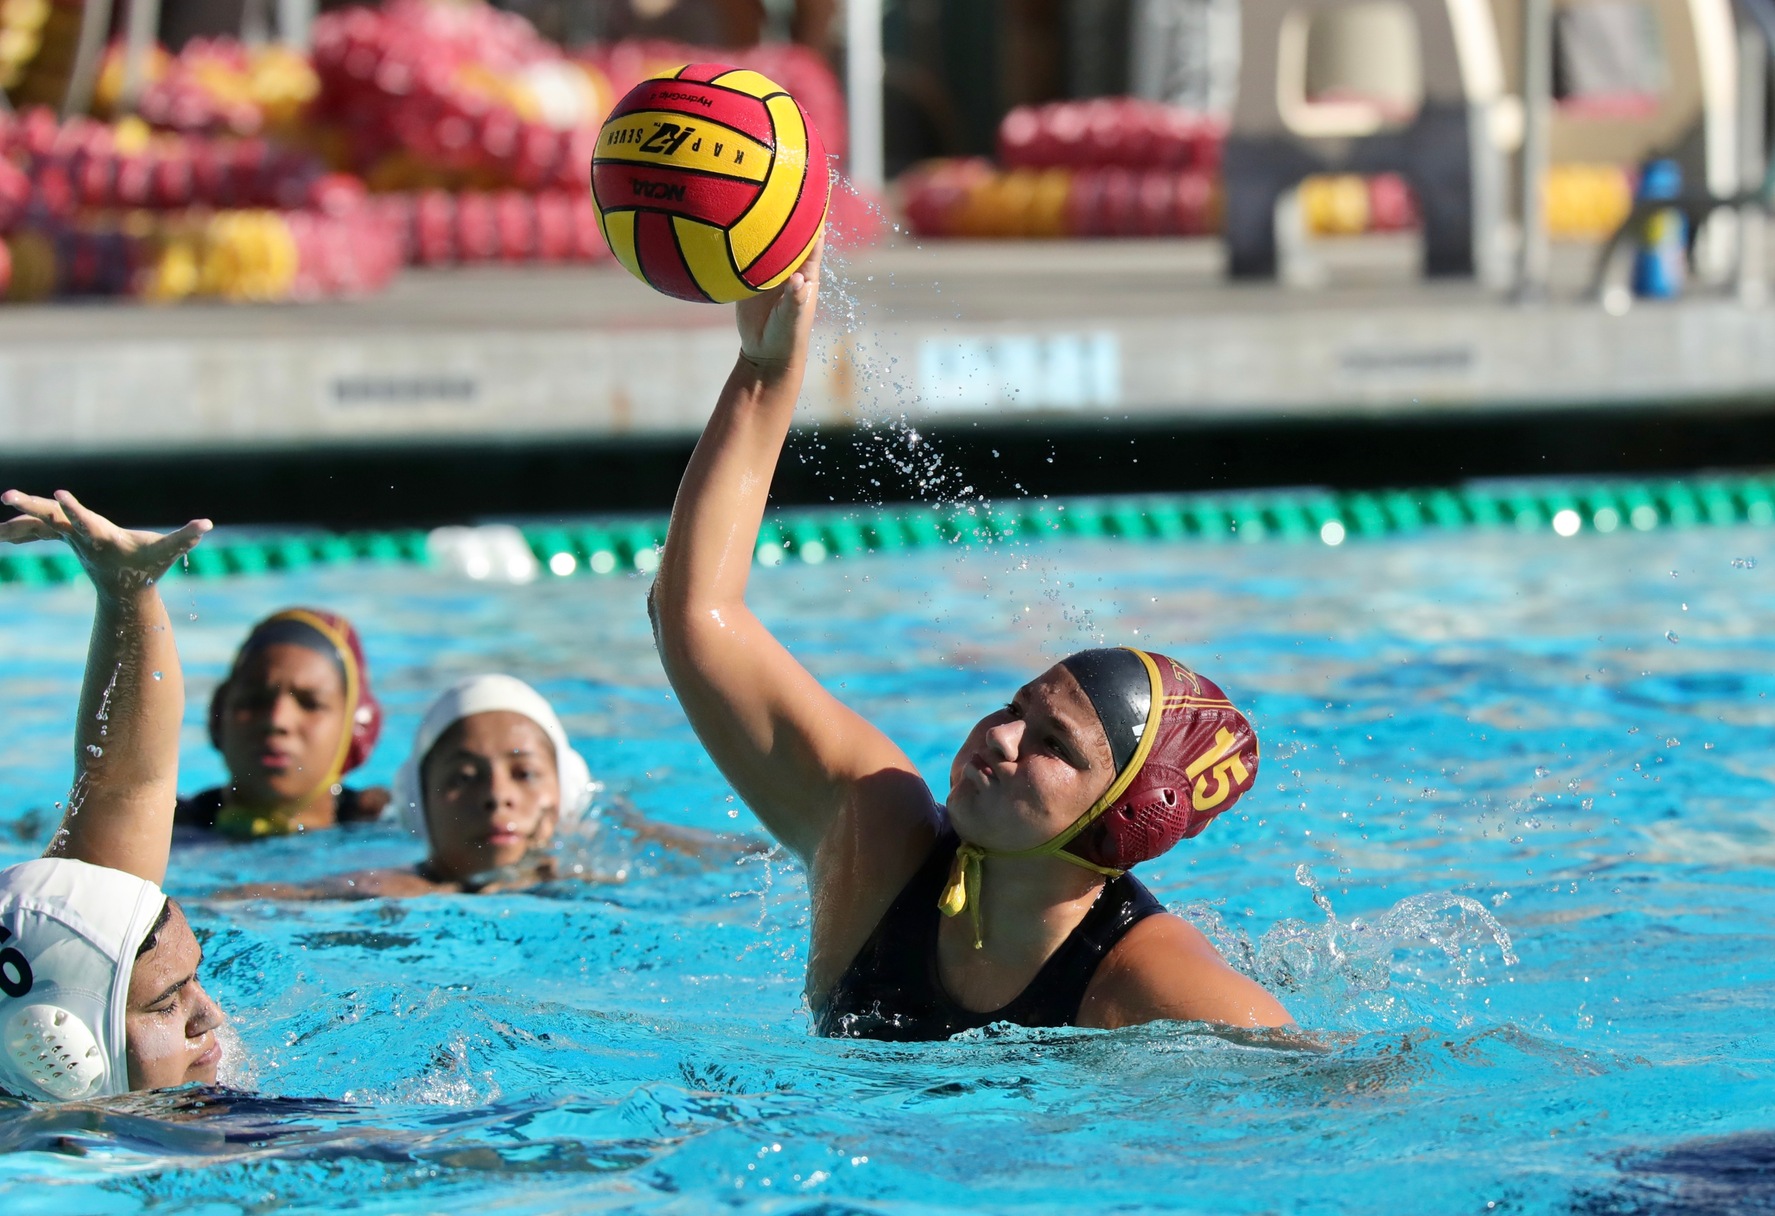 Lancer Fernandez Alvarez fires in one of her three goals in Wednesday's victory at the PCC Aquatic Center, photo by Michael Watkins.